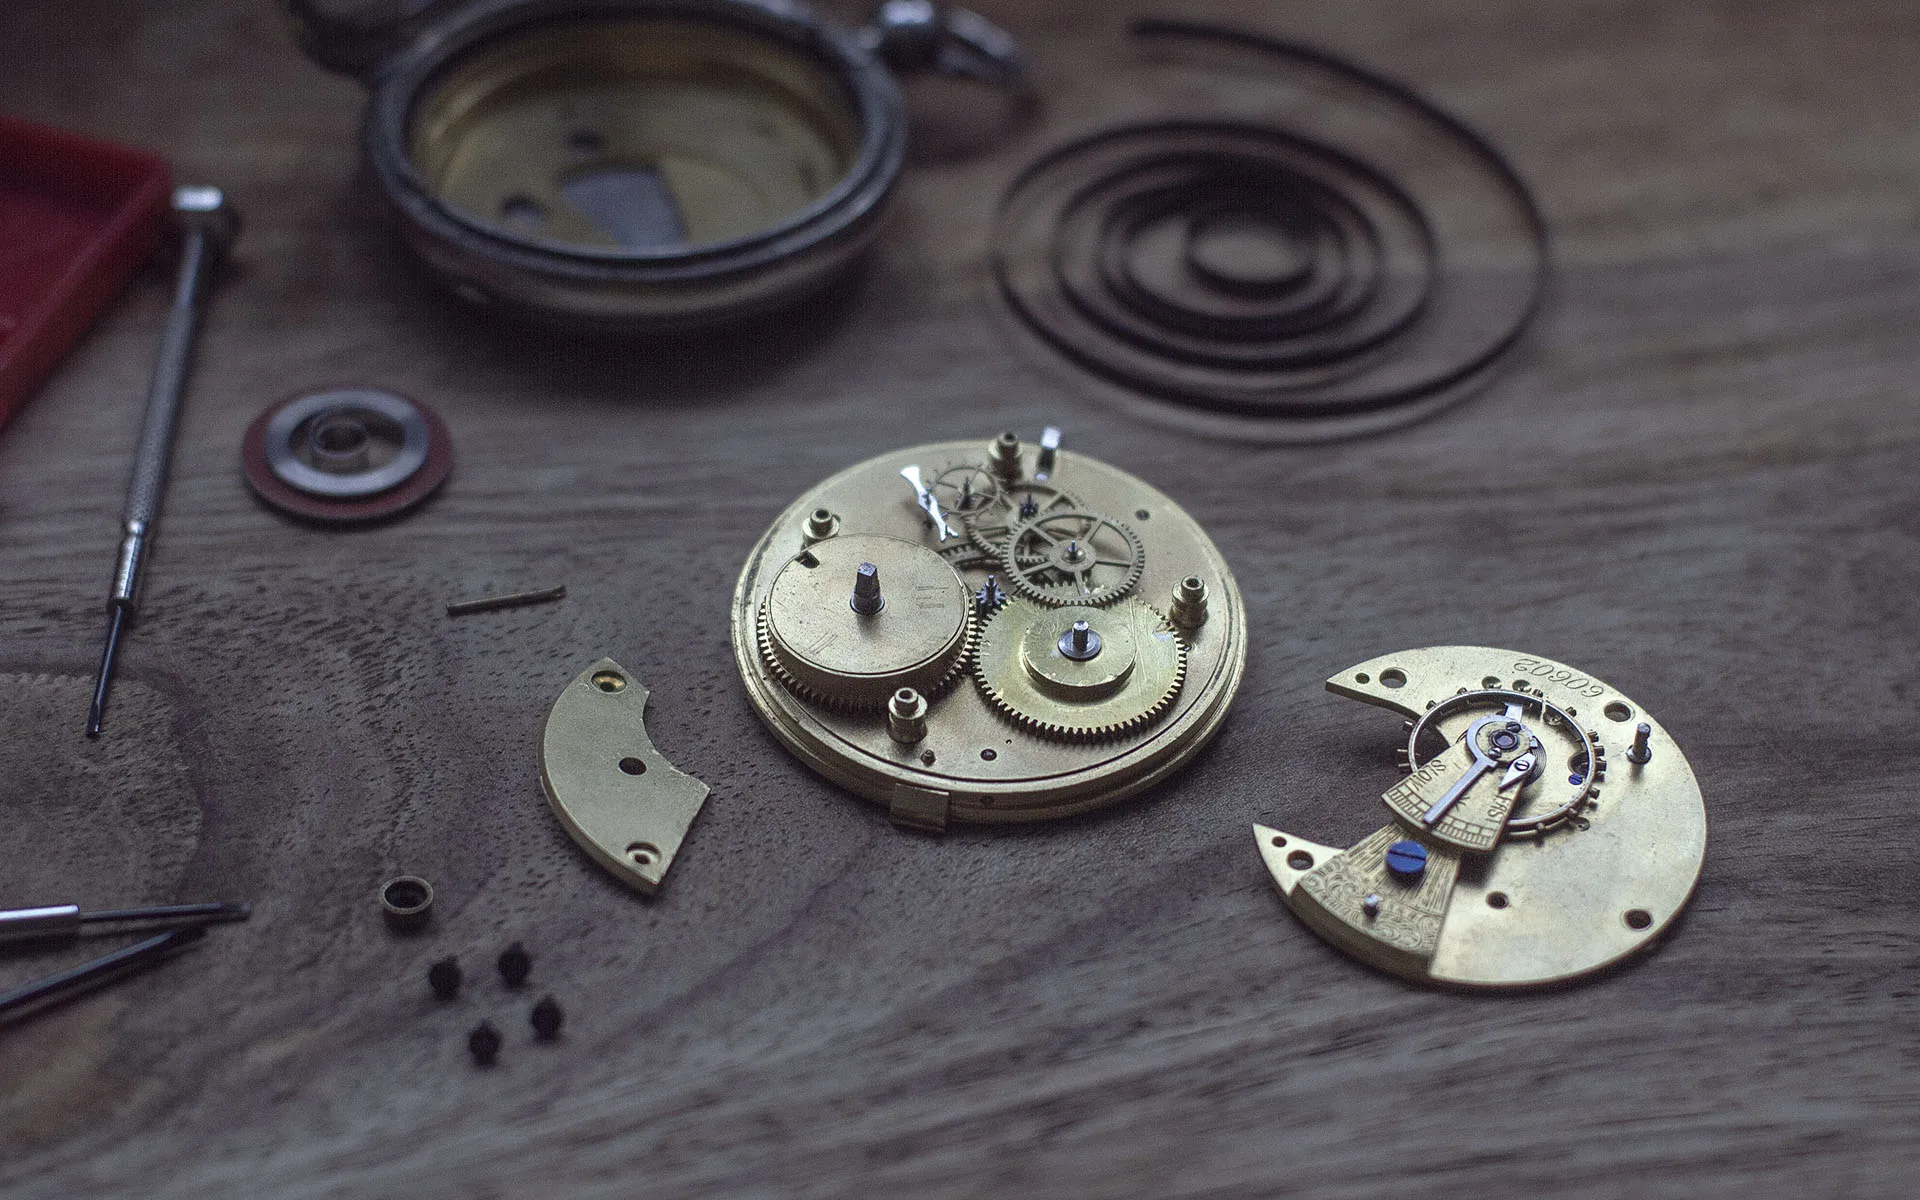 Mechanical watch gears in their place in the mechanism.